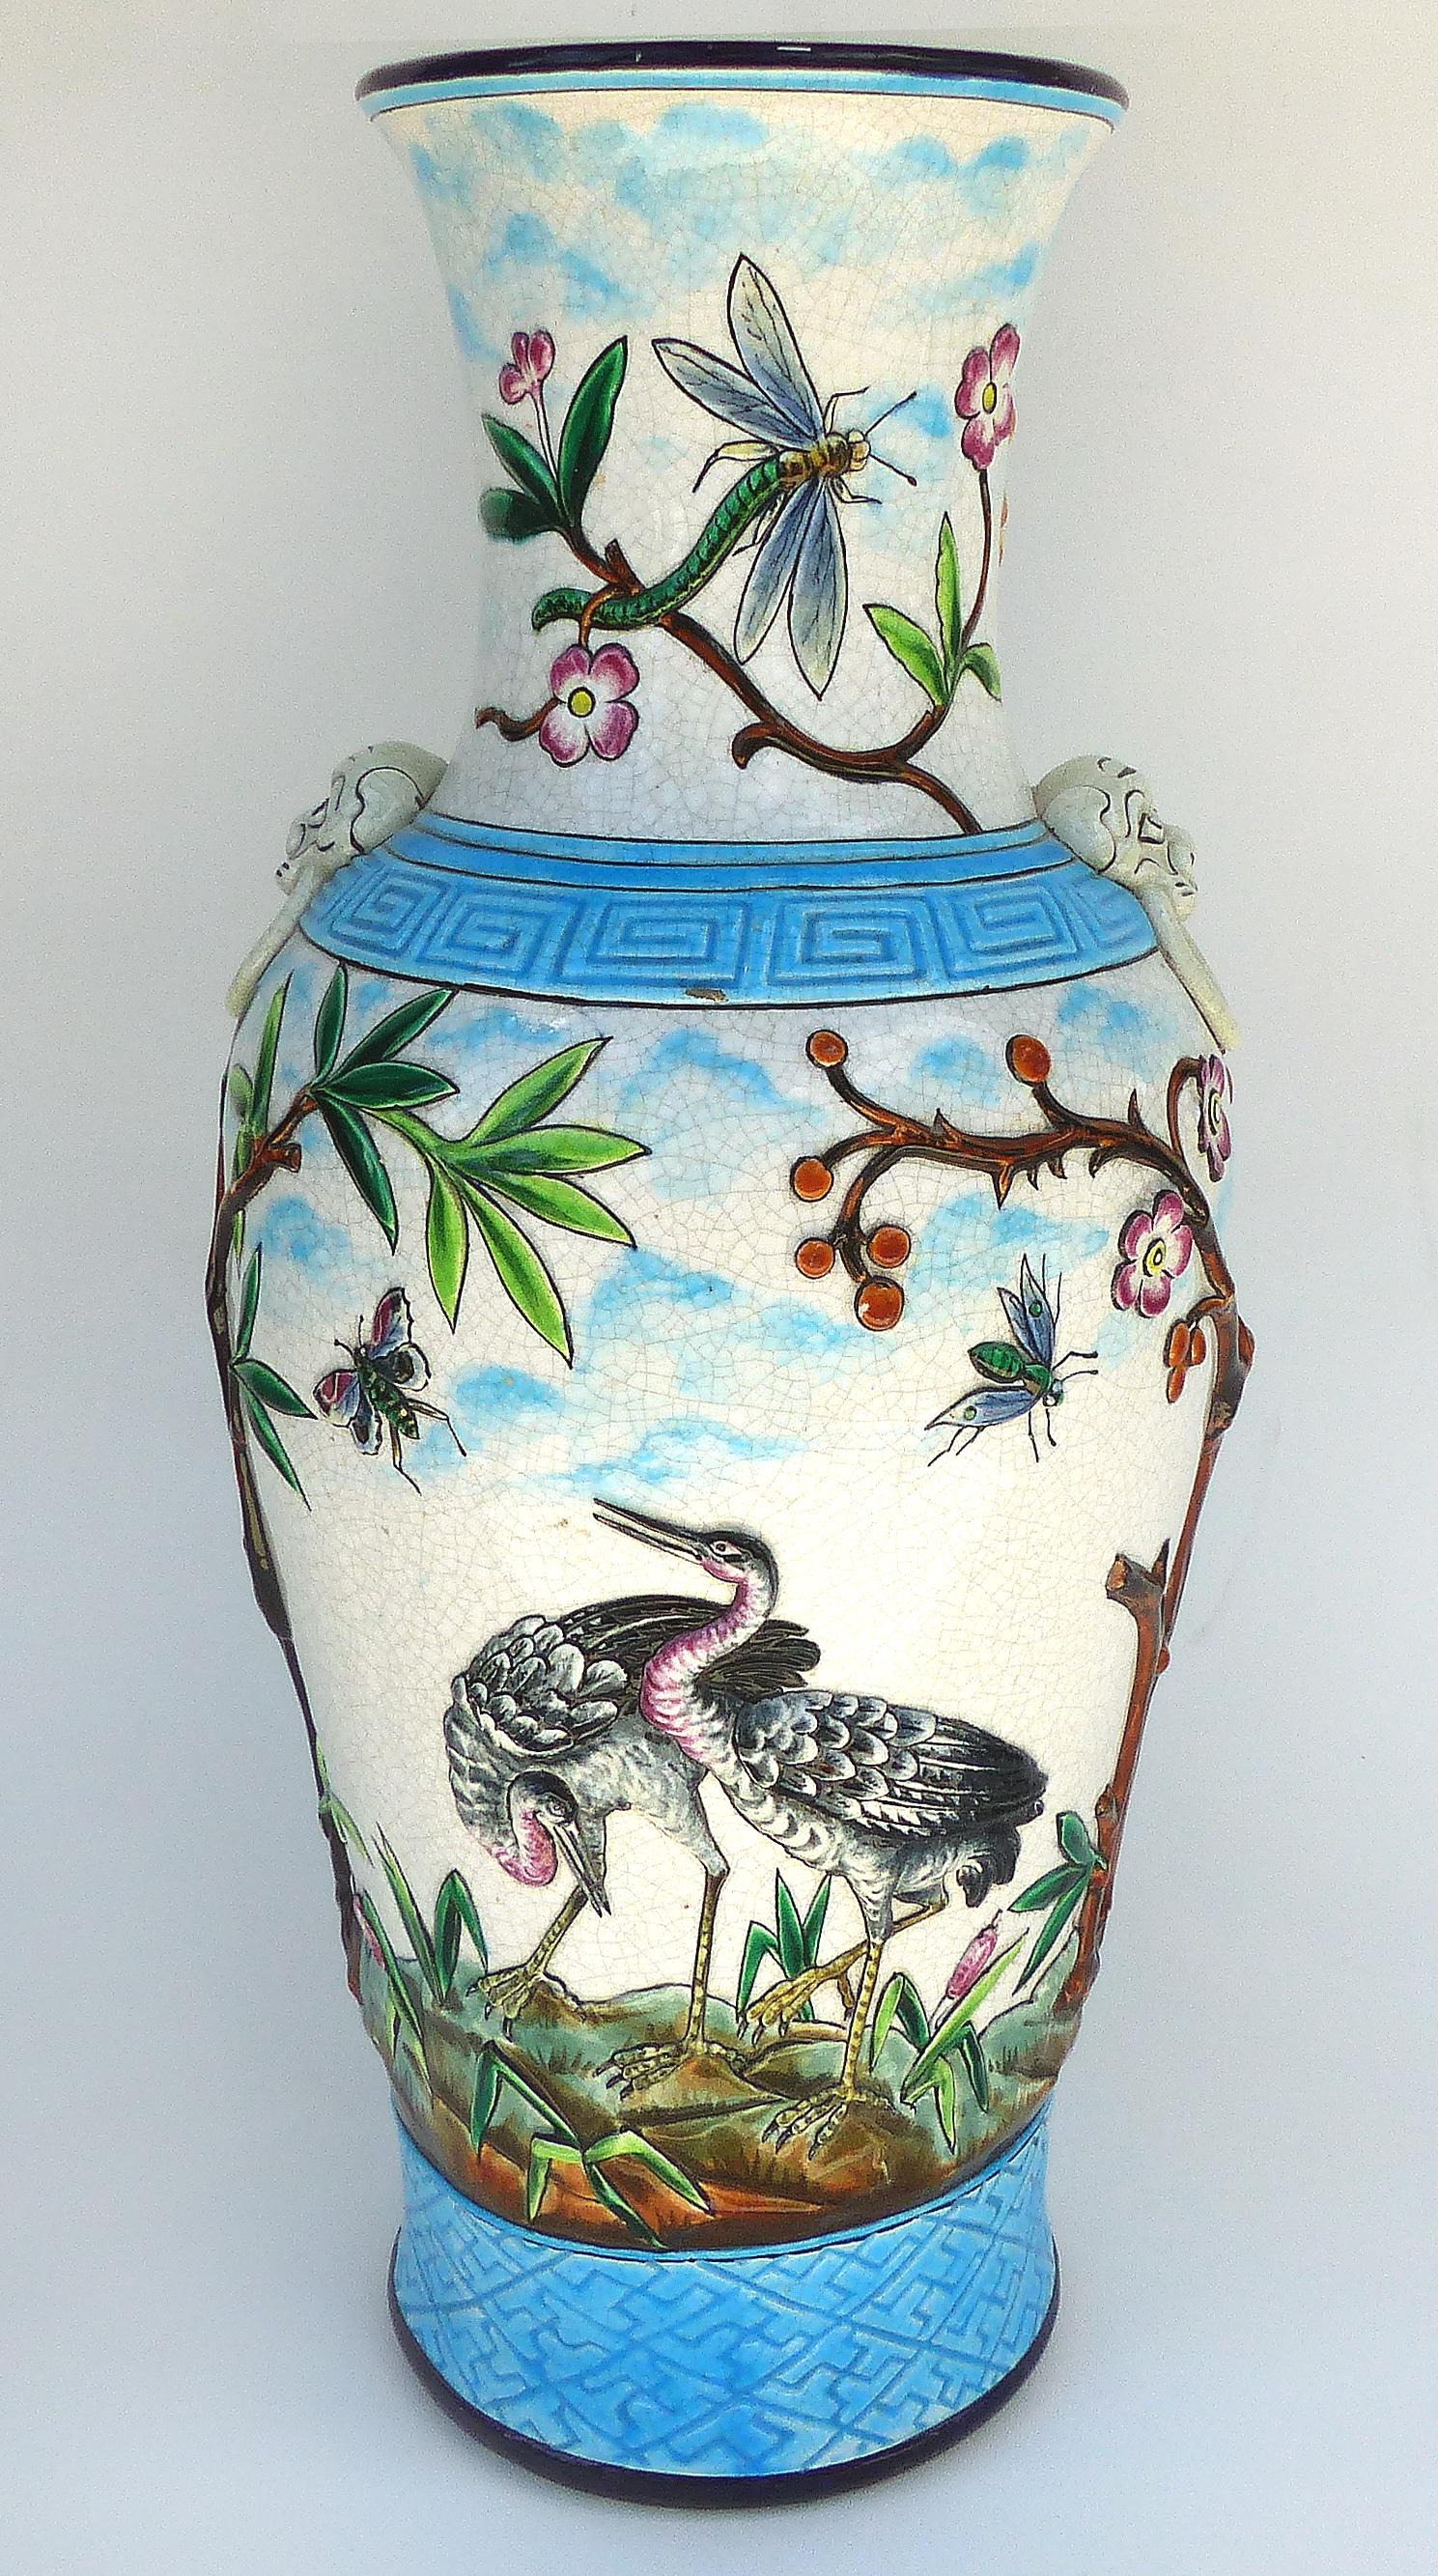 Longwy Enamel Vases in High Relief, circa 1885

Offered for sale is a pair of extremely rare Longwy monumental enameled vases in a chinoiserie style with high relief depicting birds, roosters, butterflies and flying insects. Marked on base as